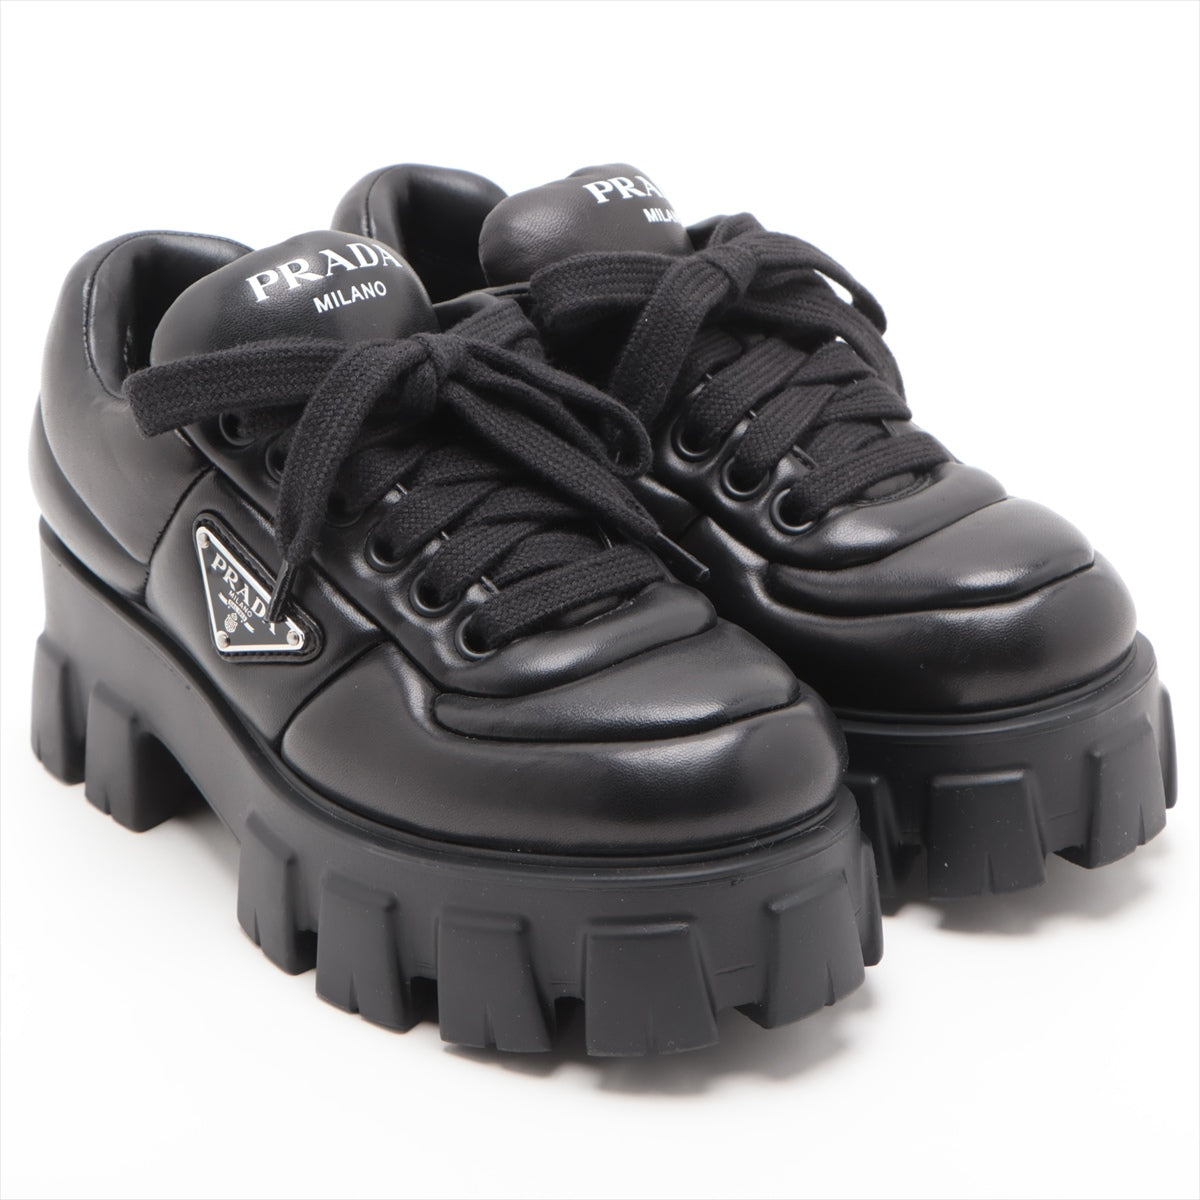 Prada Leather Sneakers 36 Ladies' Black Triangle logo putted Monolith